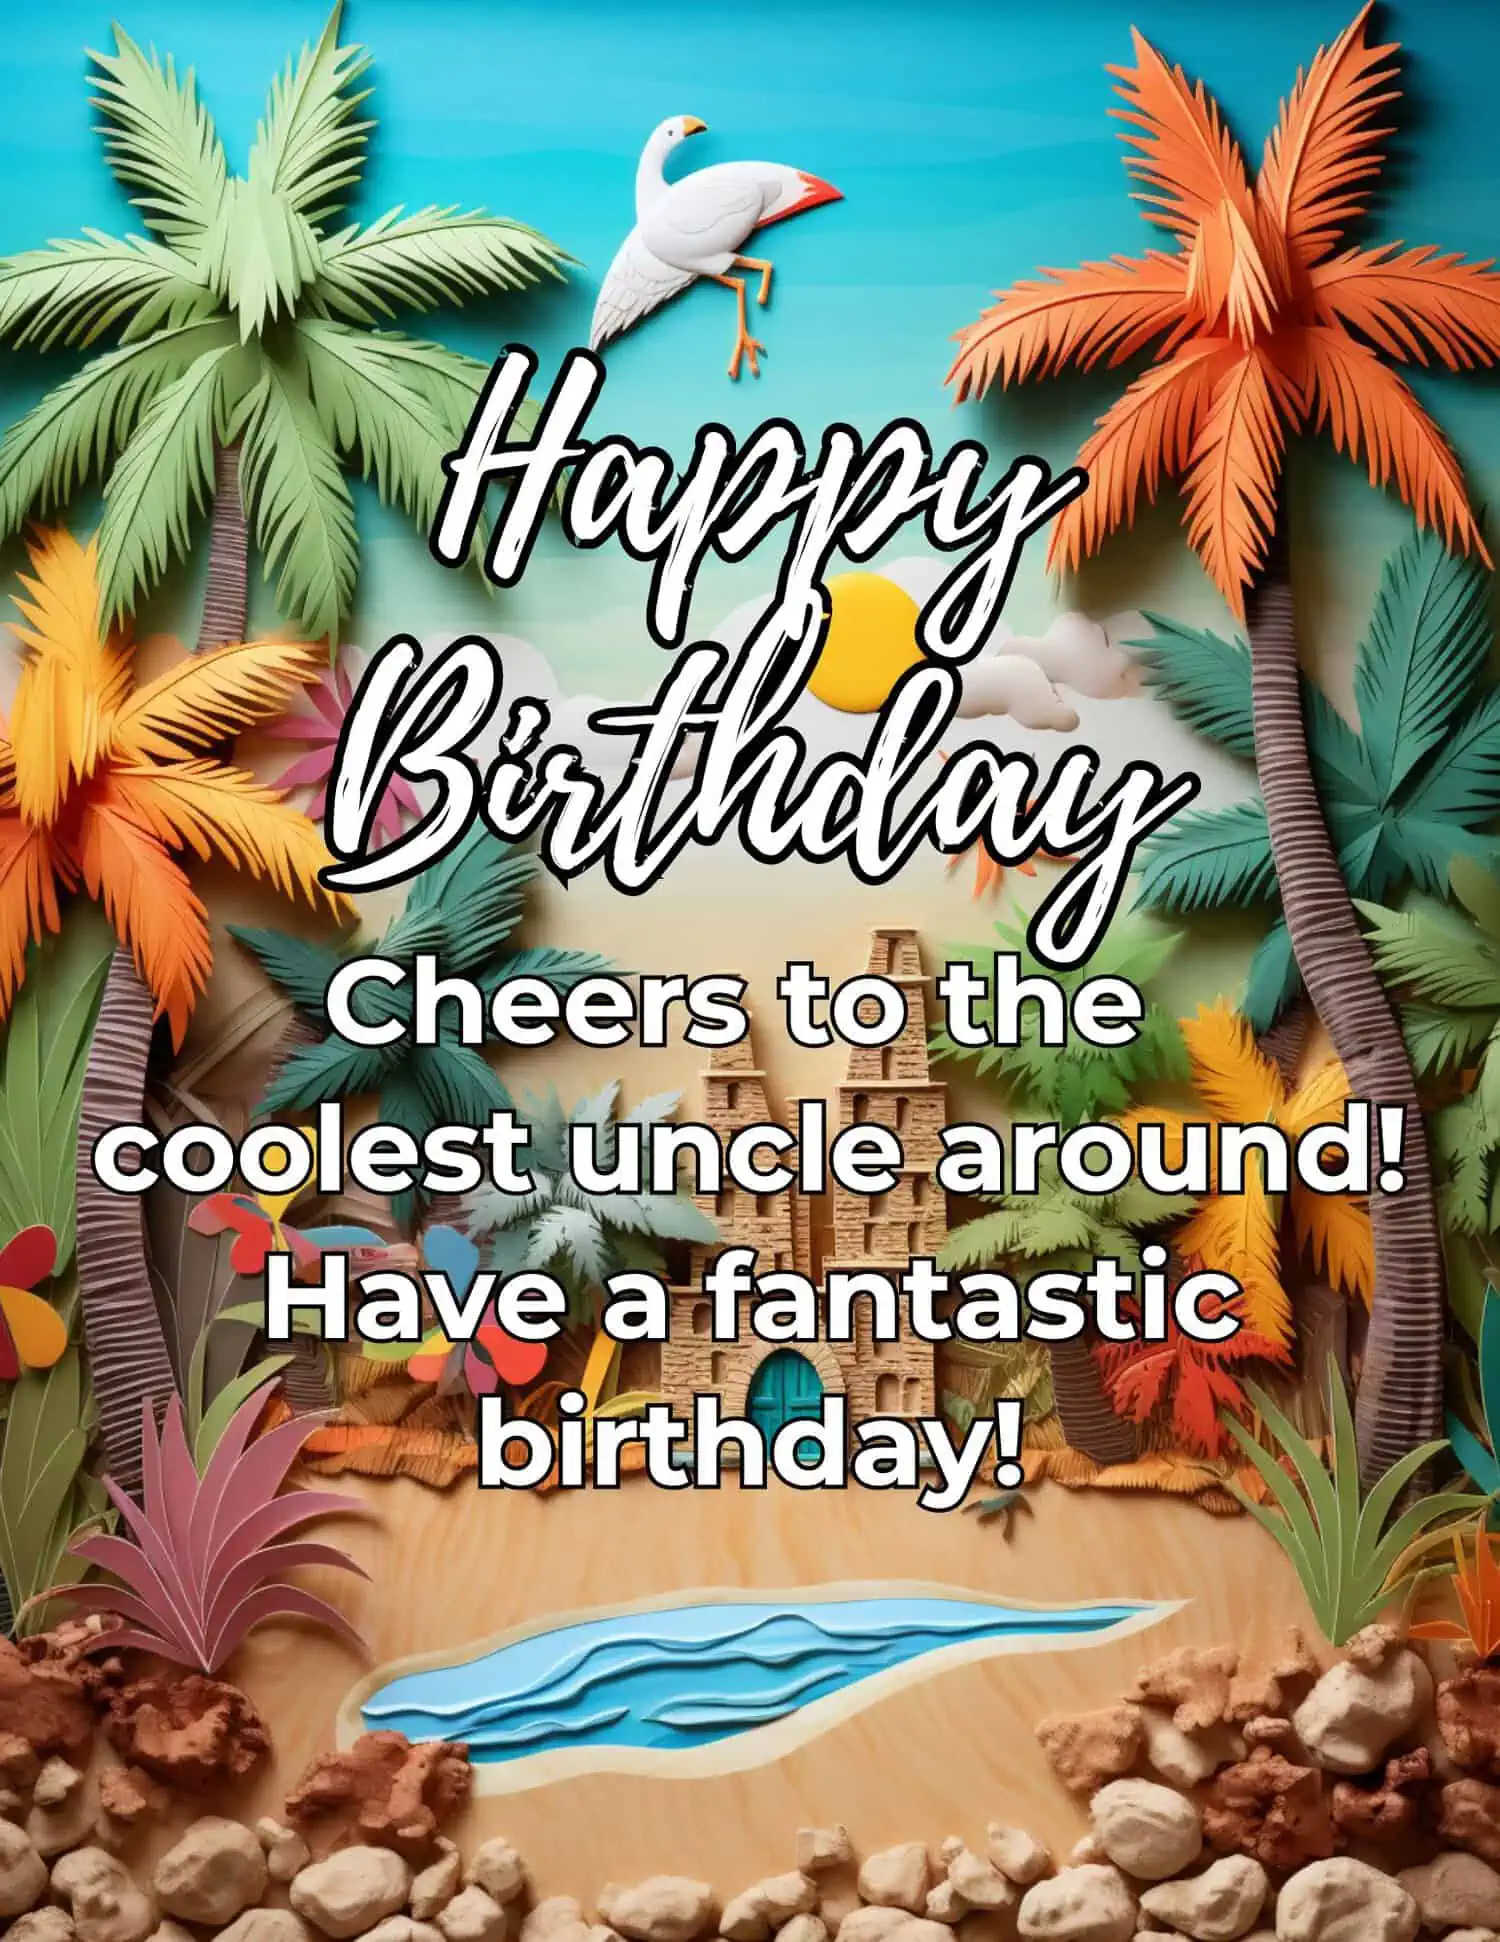 A collection of concise and heartfelt birthday messages tailored for uncles, perfect for expressing affection and appreciation in a few meaningful words.